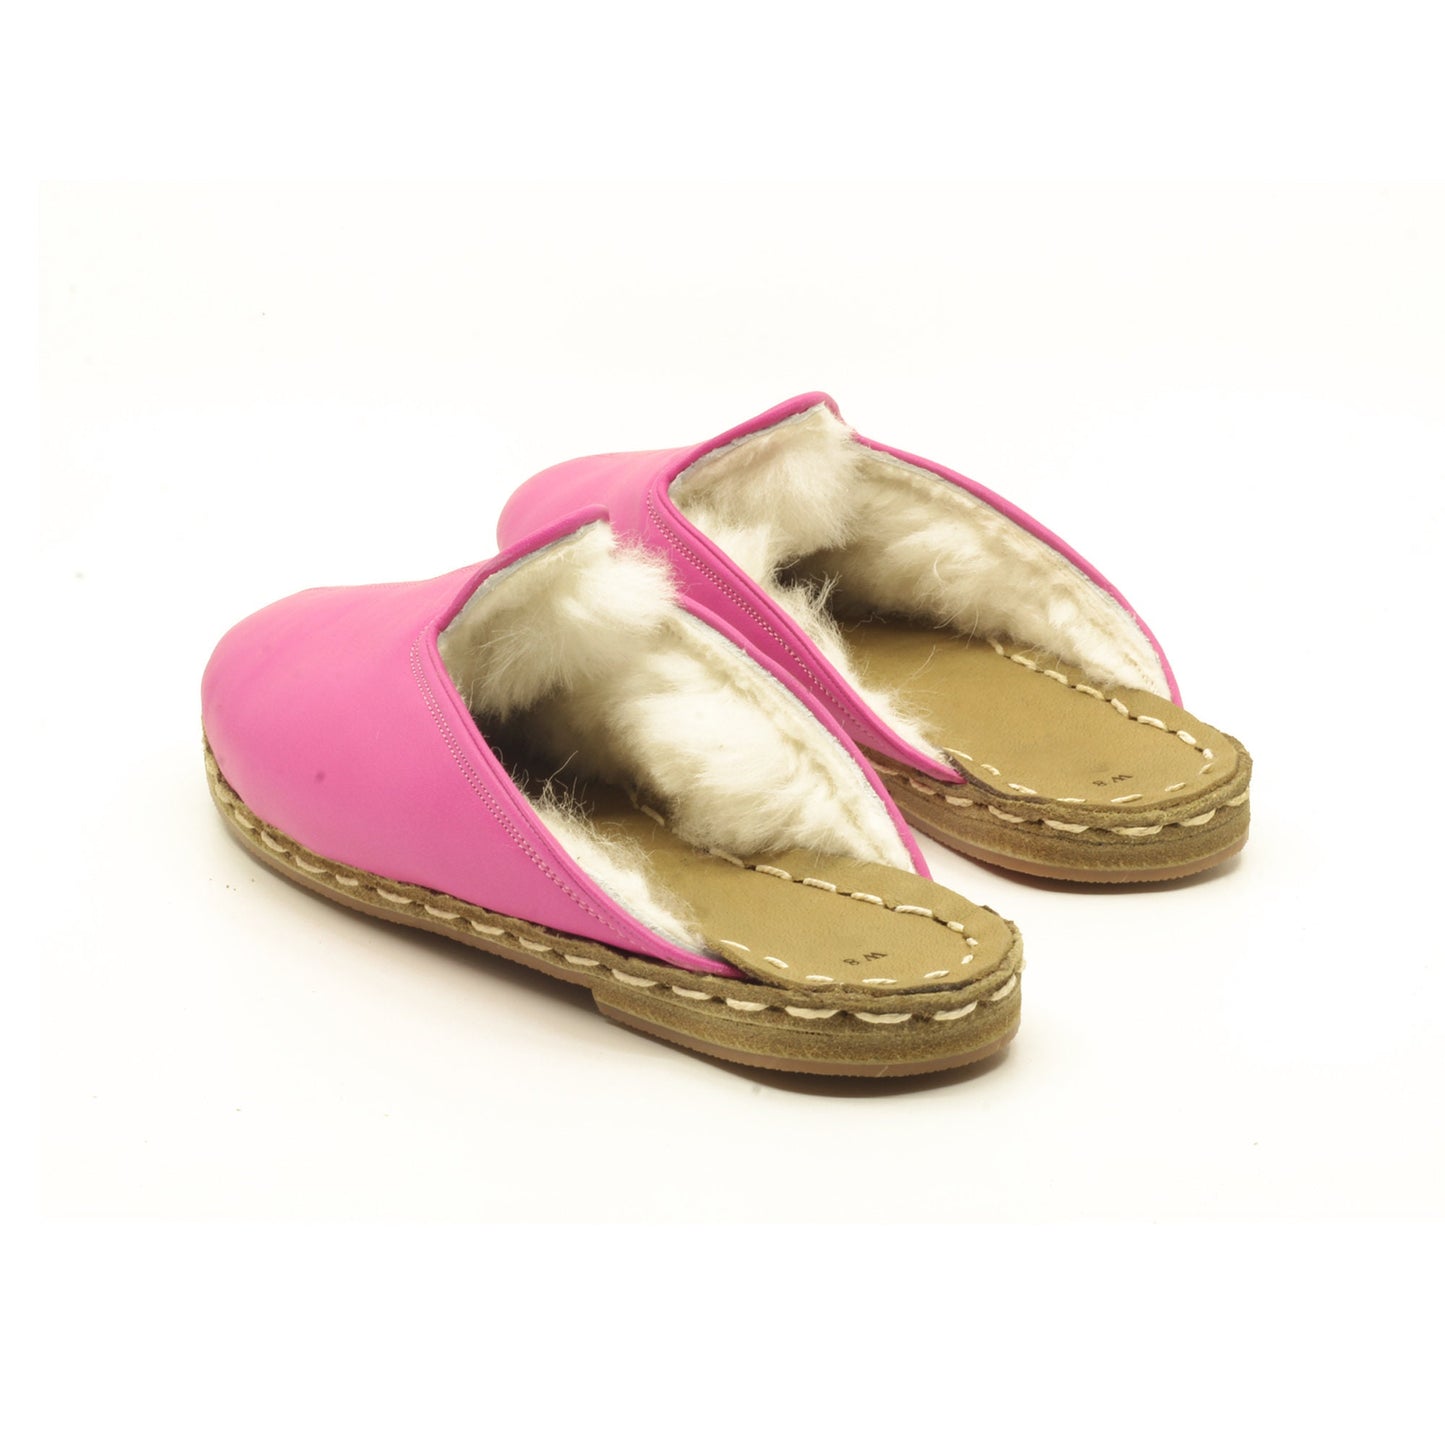 Winter Slippers  - Sheepskin slippers  - Close Toed Slippers - Pink Leather – Rubber Sole - For Women